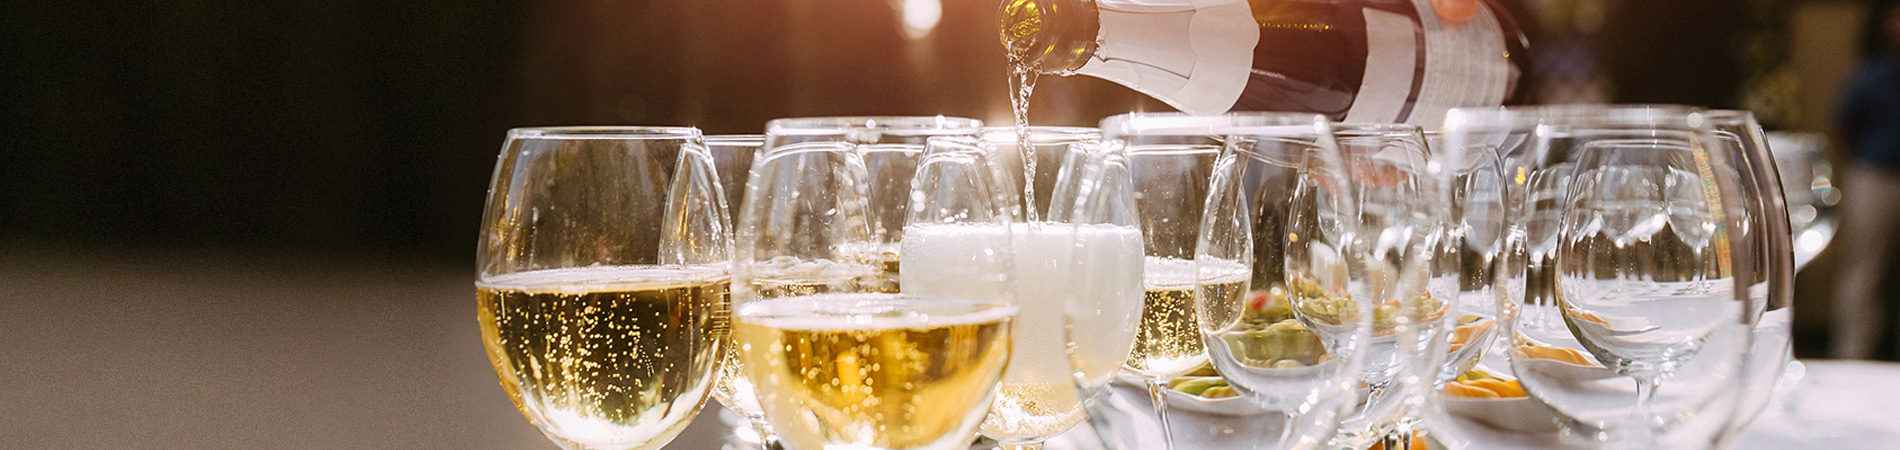 champagne being poured into glasses